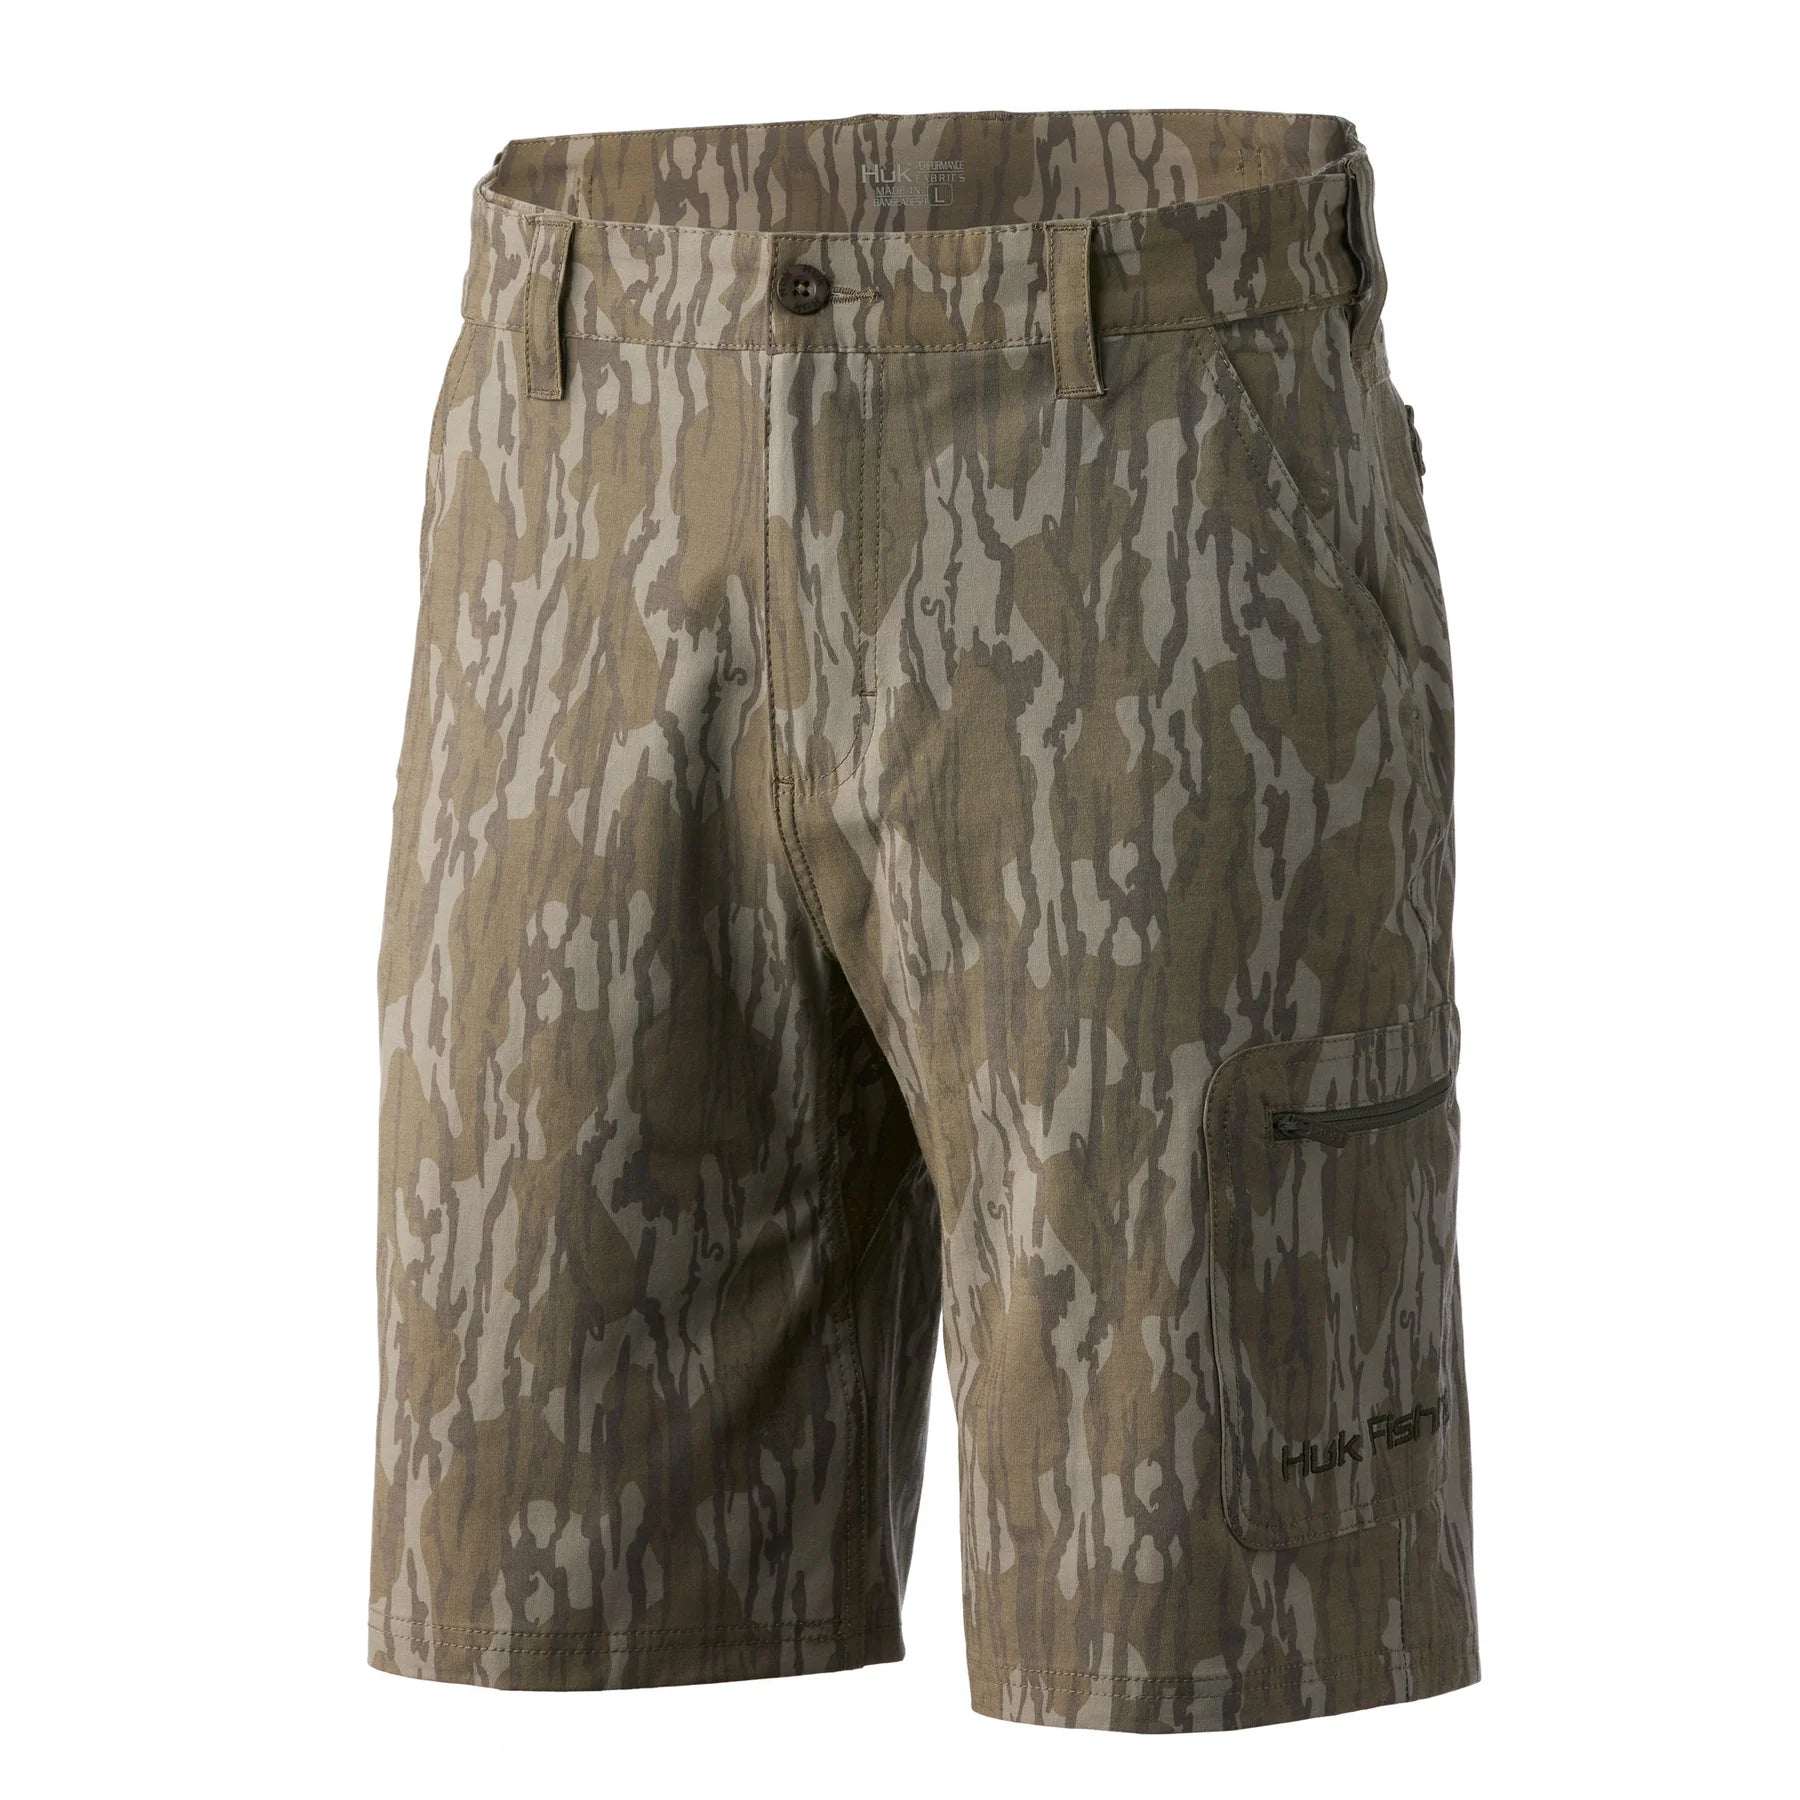 Huk Next Level Short 10.5 Inseam - Bottomland – Shade Tree Outfitters